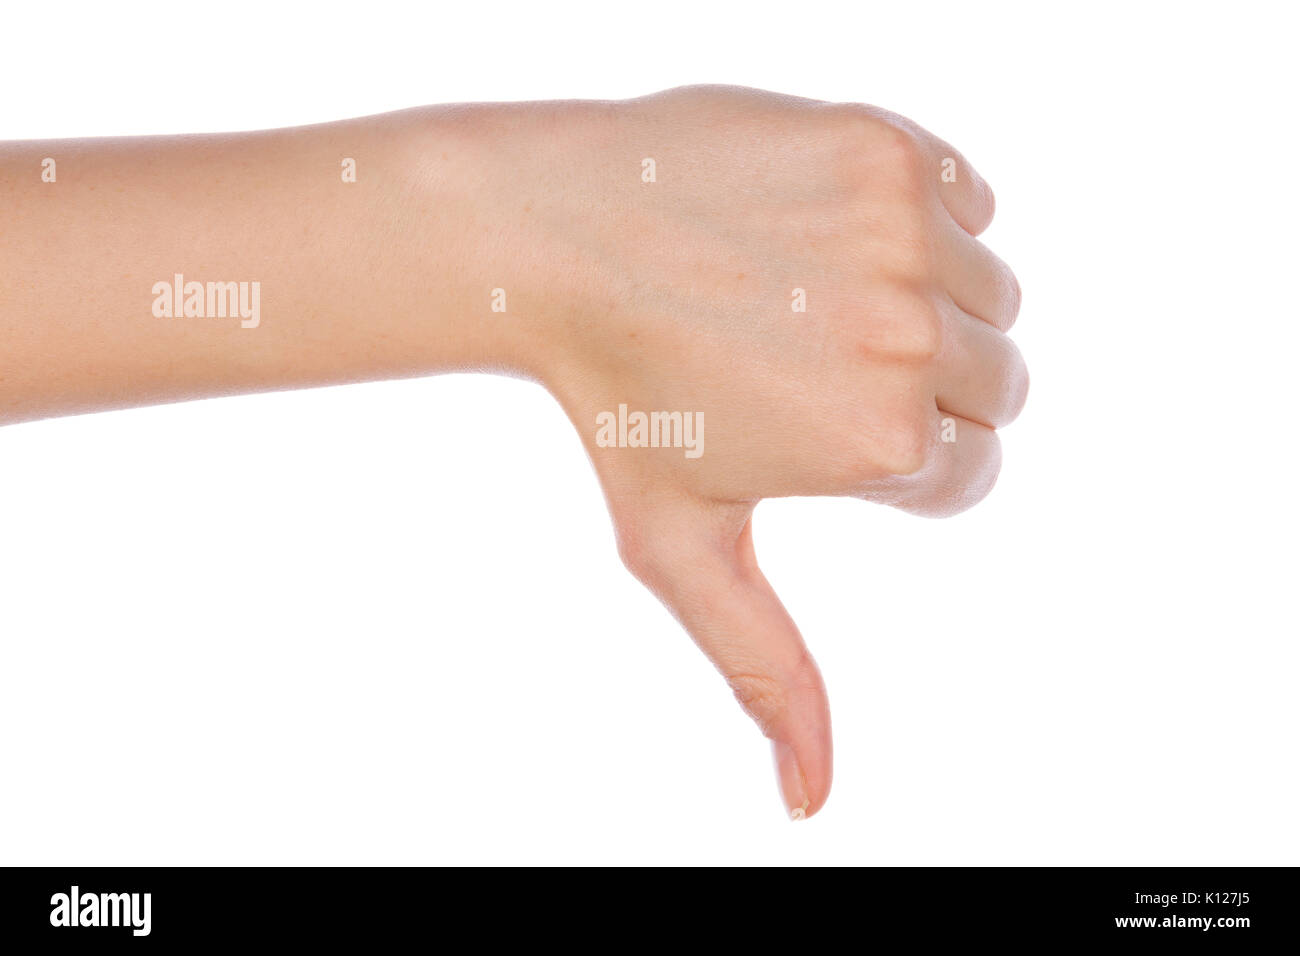 Girl hand showing thumb down failure hand sign gesture. Gestures and signs. Body language on white background. Stock Photo